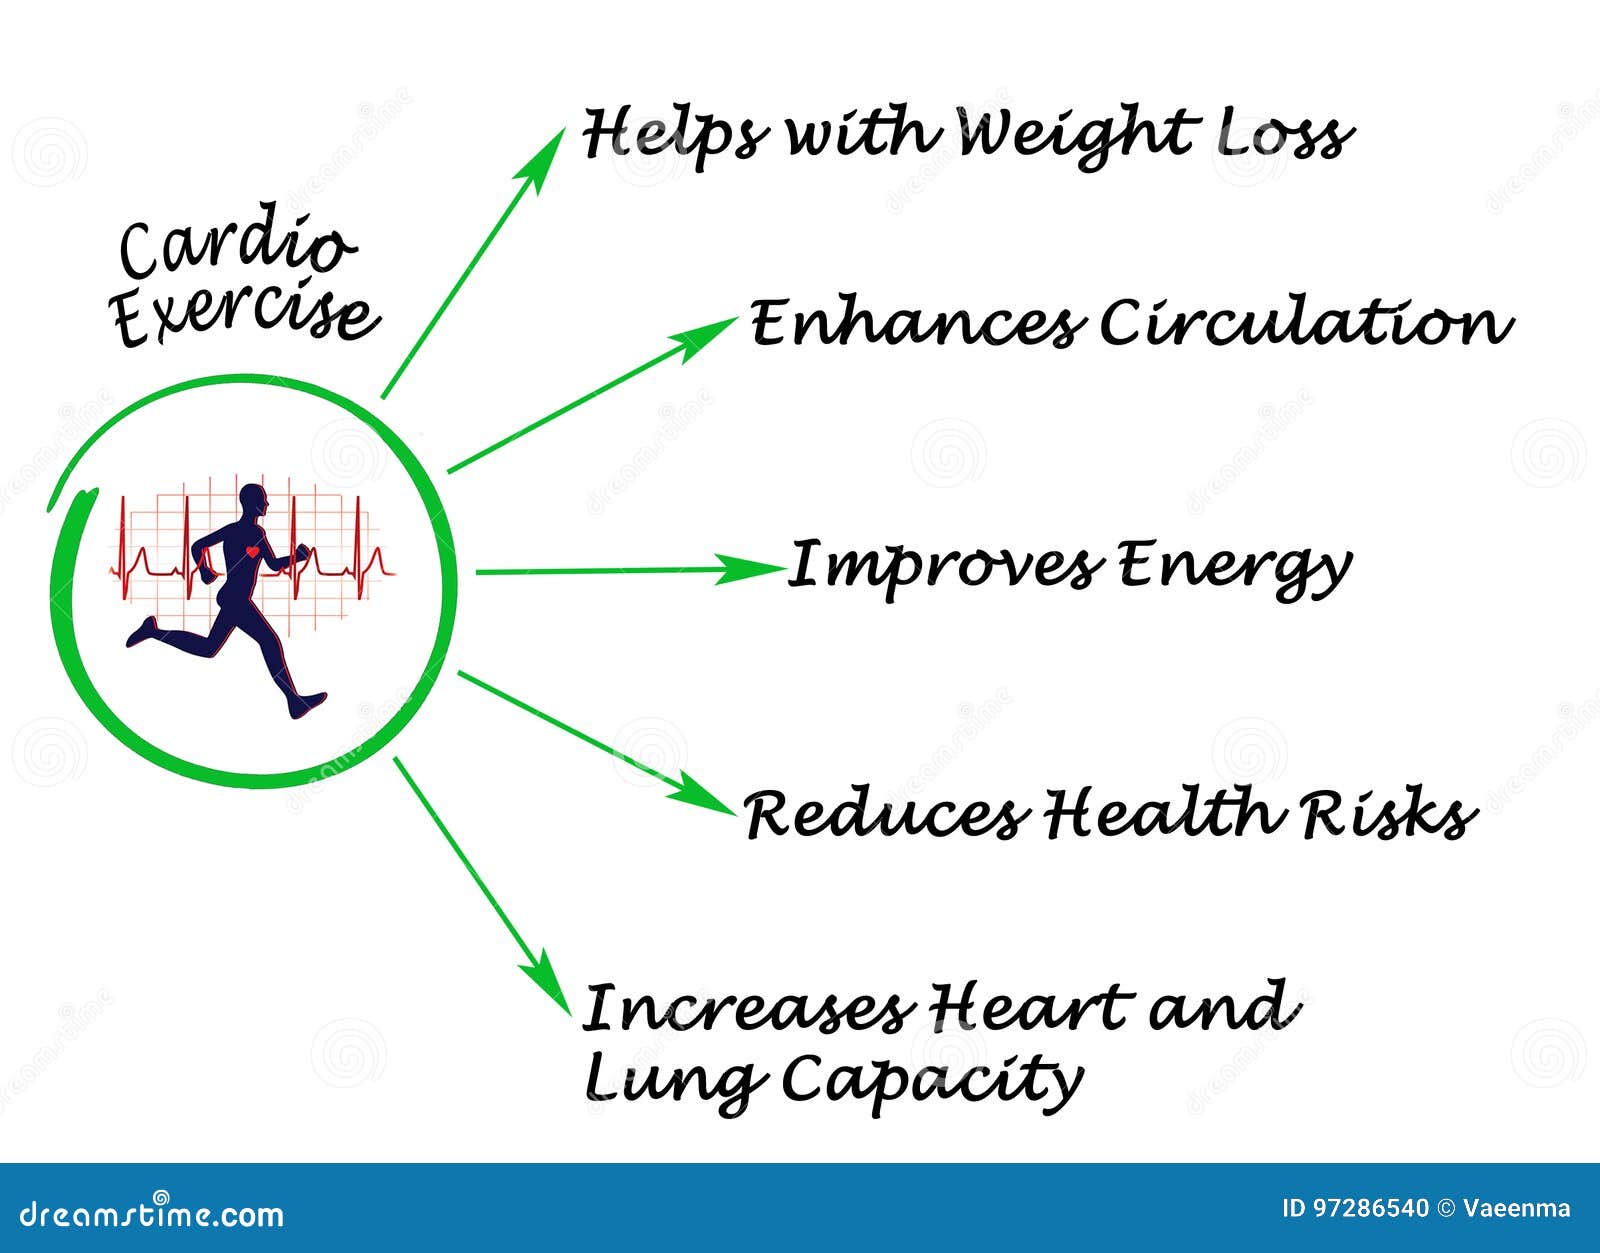 The Importance of Cardio Exercise